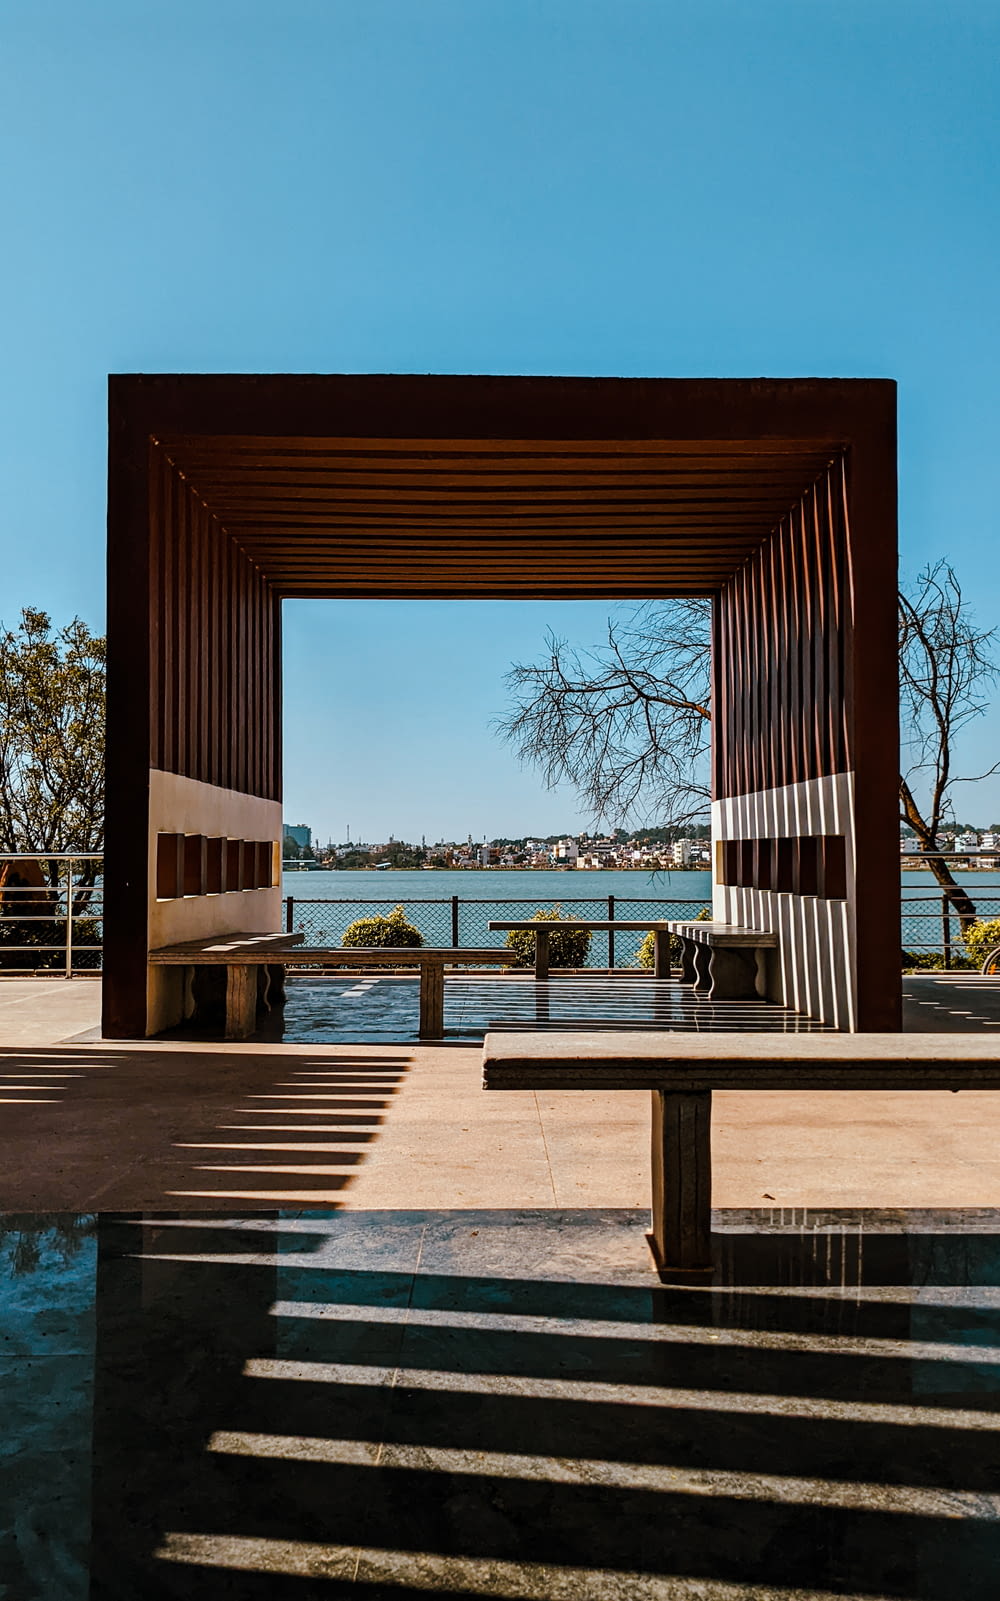 a bench sitting under a wooden structure next to a body of water